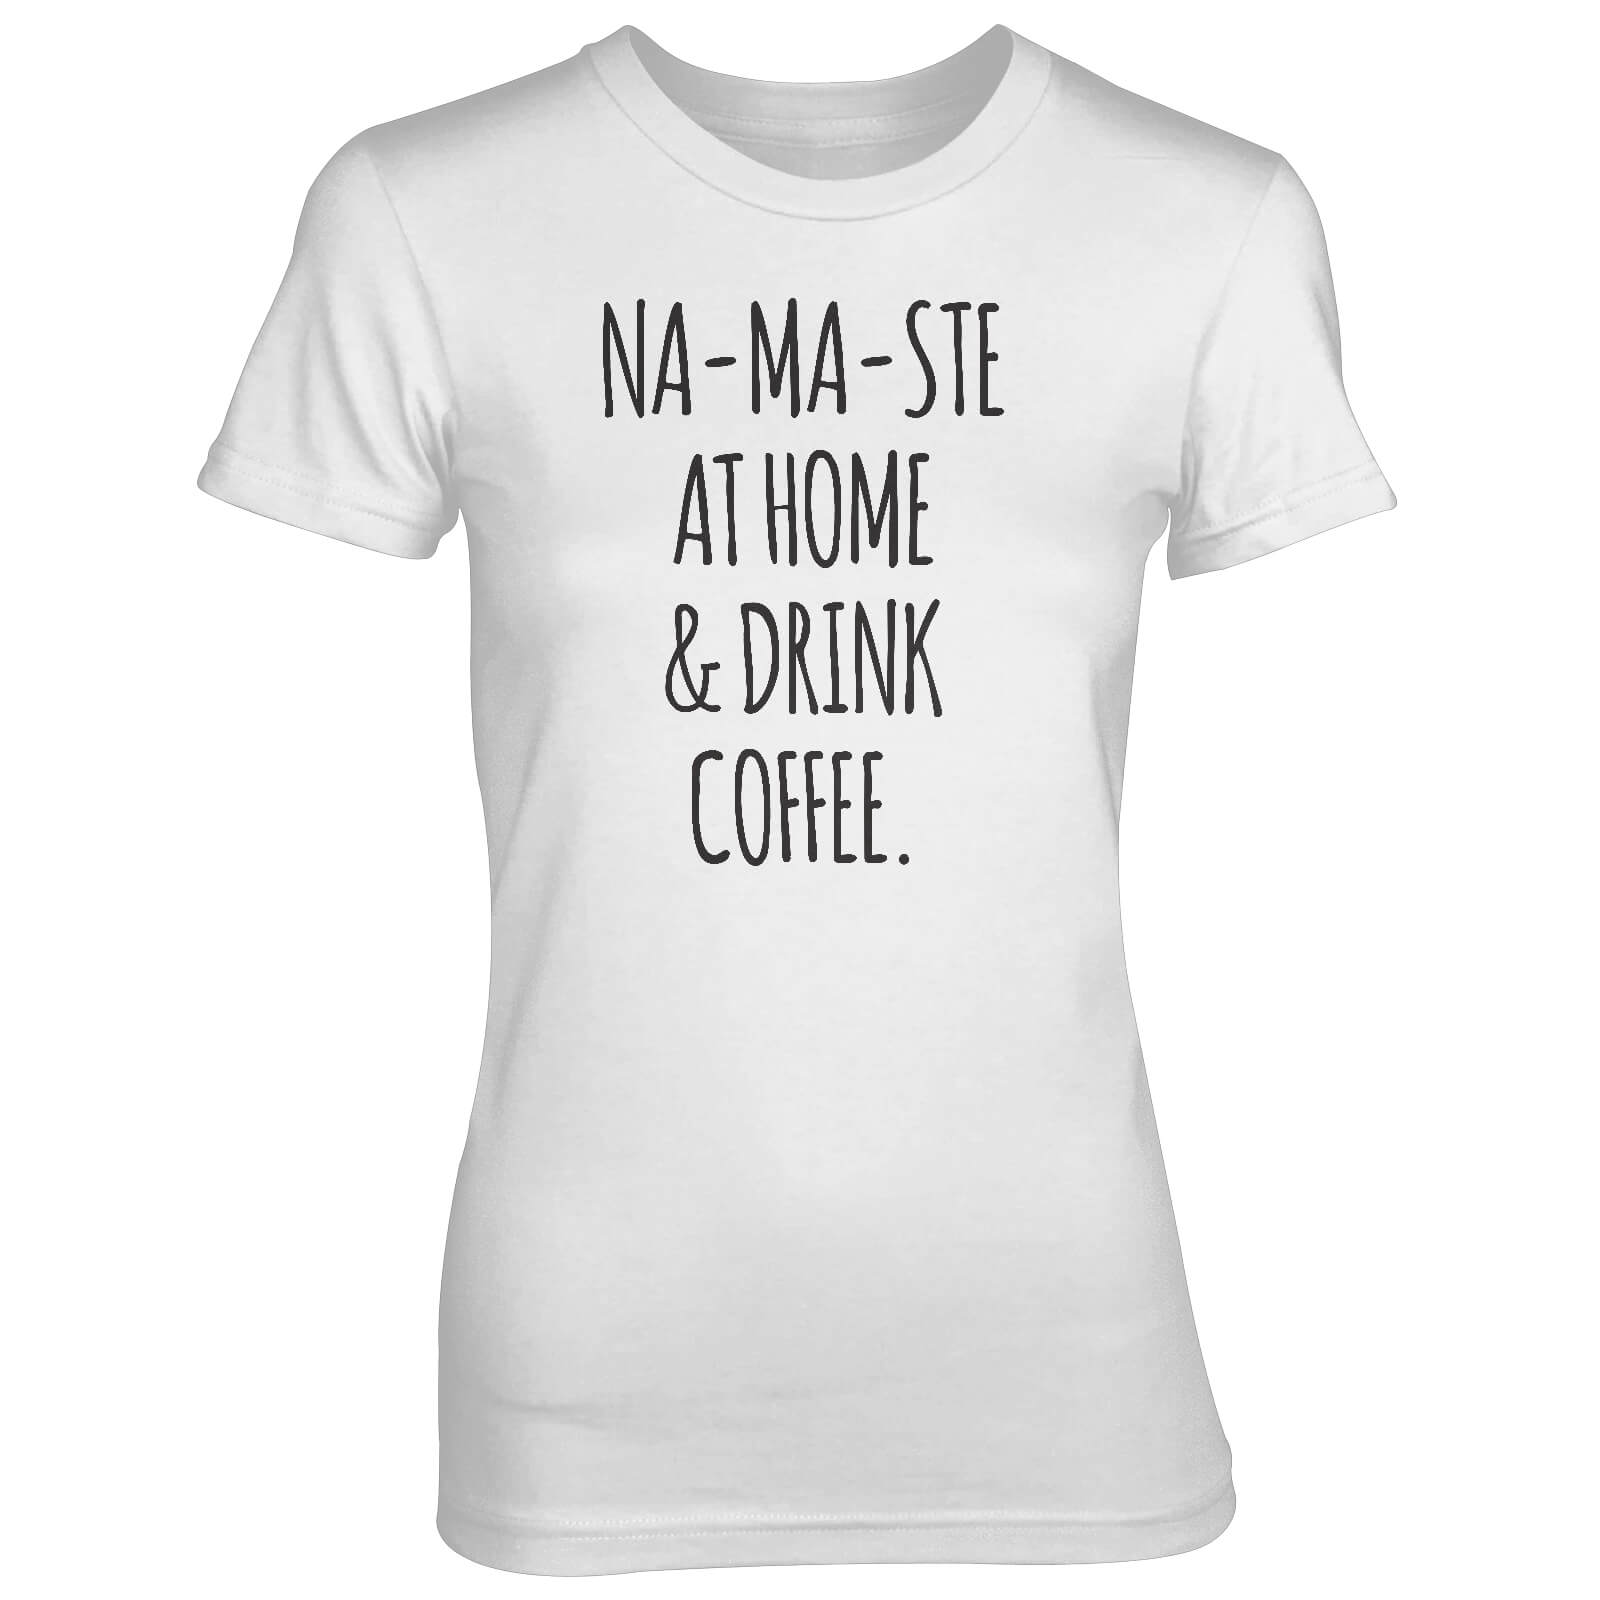 Na-Ma-Ste At Home And Drink Coffee Women's White T-Shirt - S - White